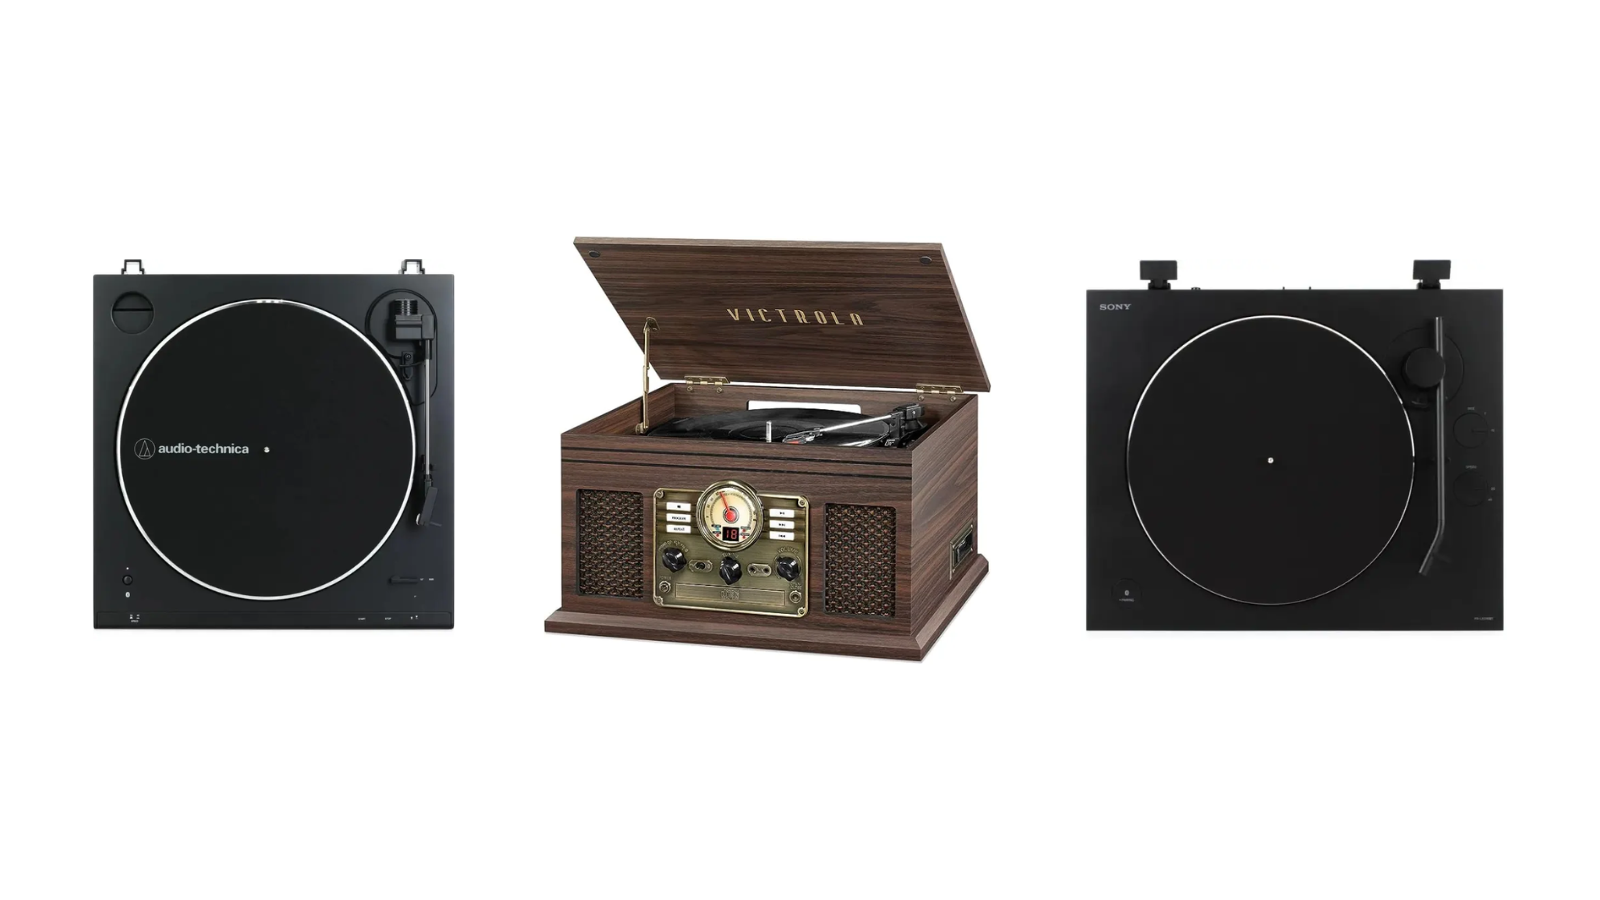 7 unique gifts for music lovers: Speakers, vinyls, record players